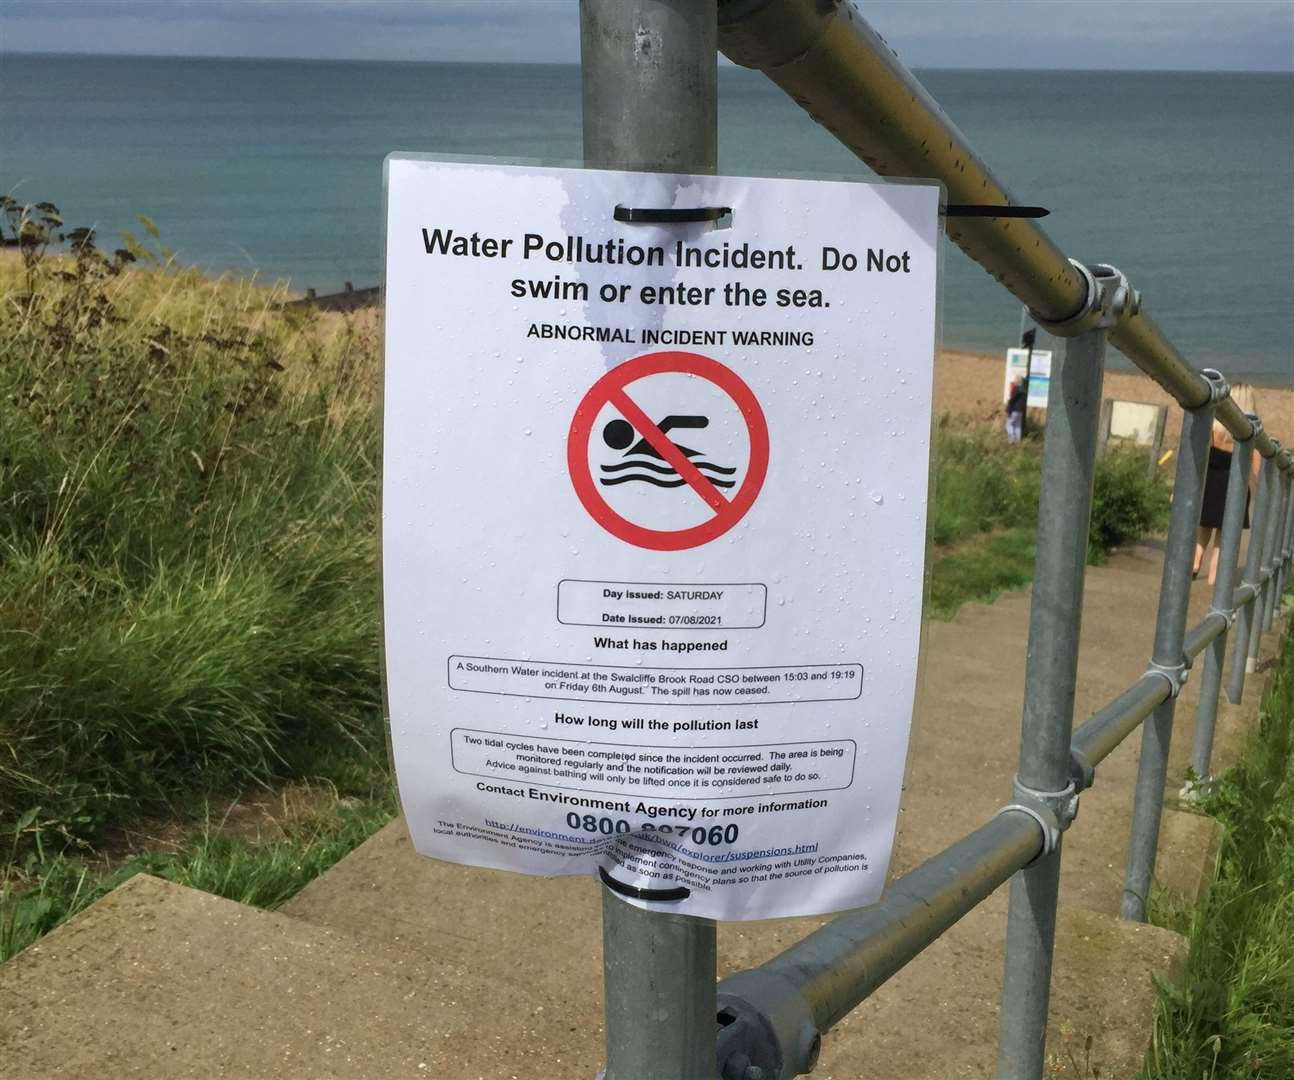 Do-not-swim signs were left in Tankerton after a pollution release at the Southern Water treatment site in Swalecliffe earlier this month